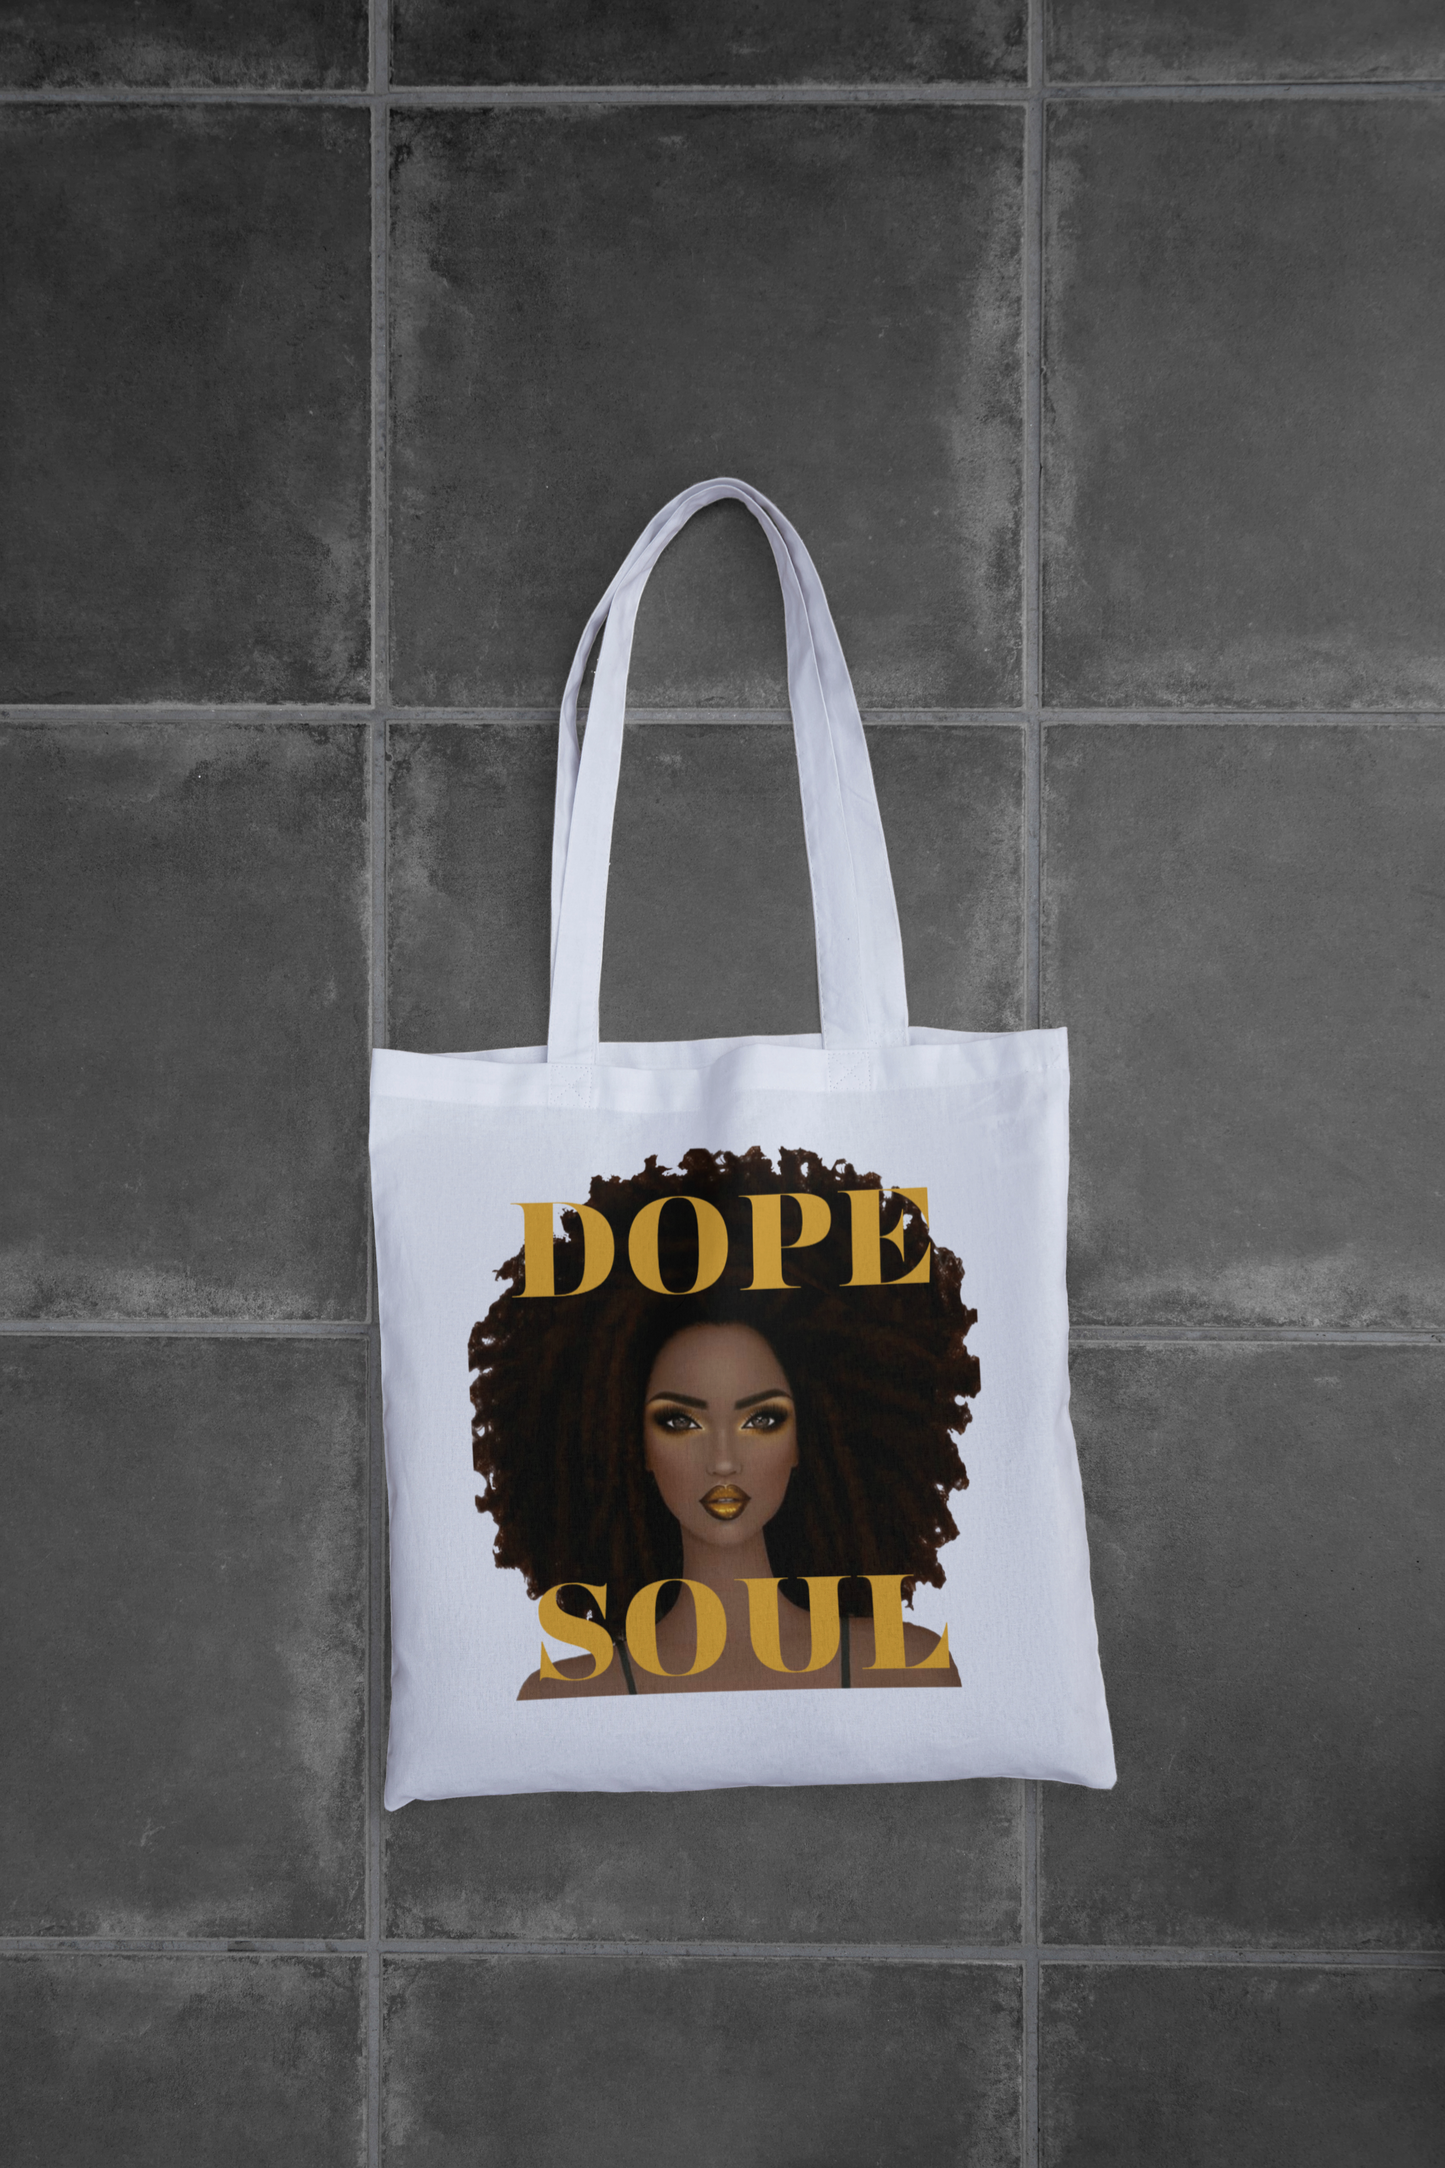 DOPE SOUL SMALL TOTE BAG